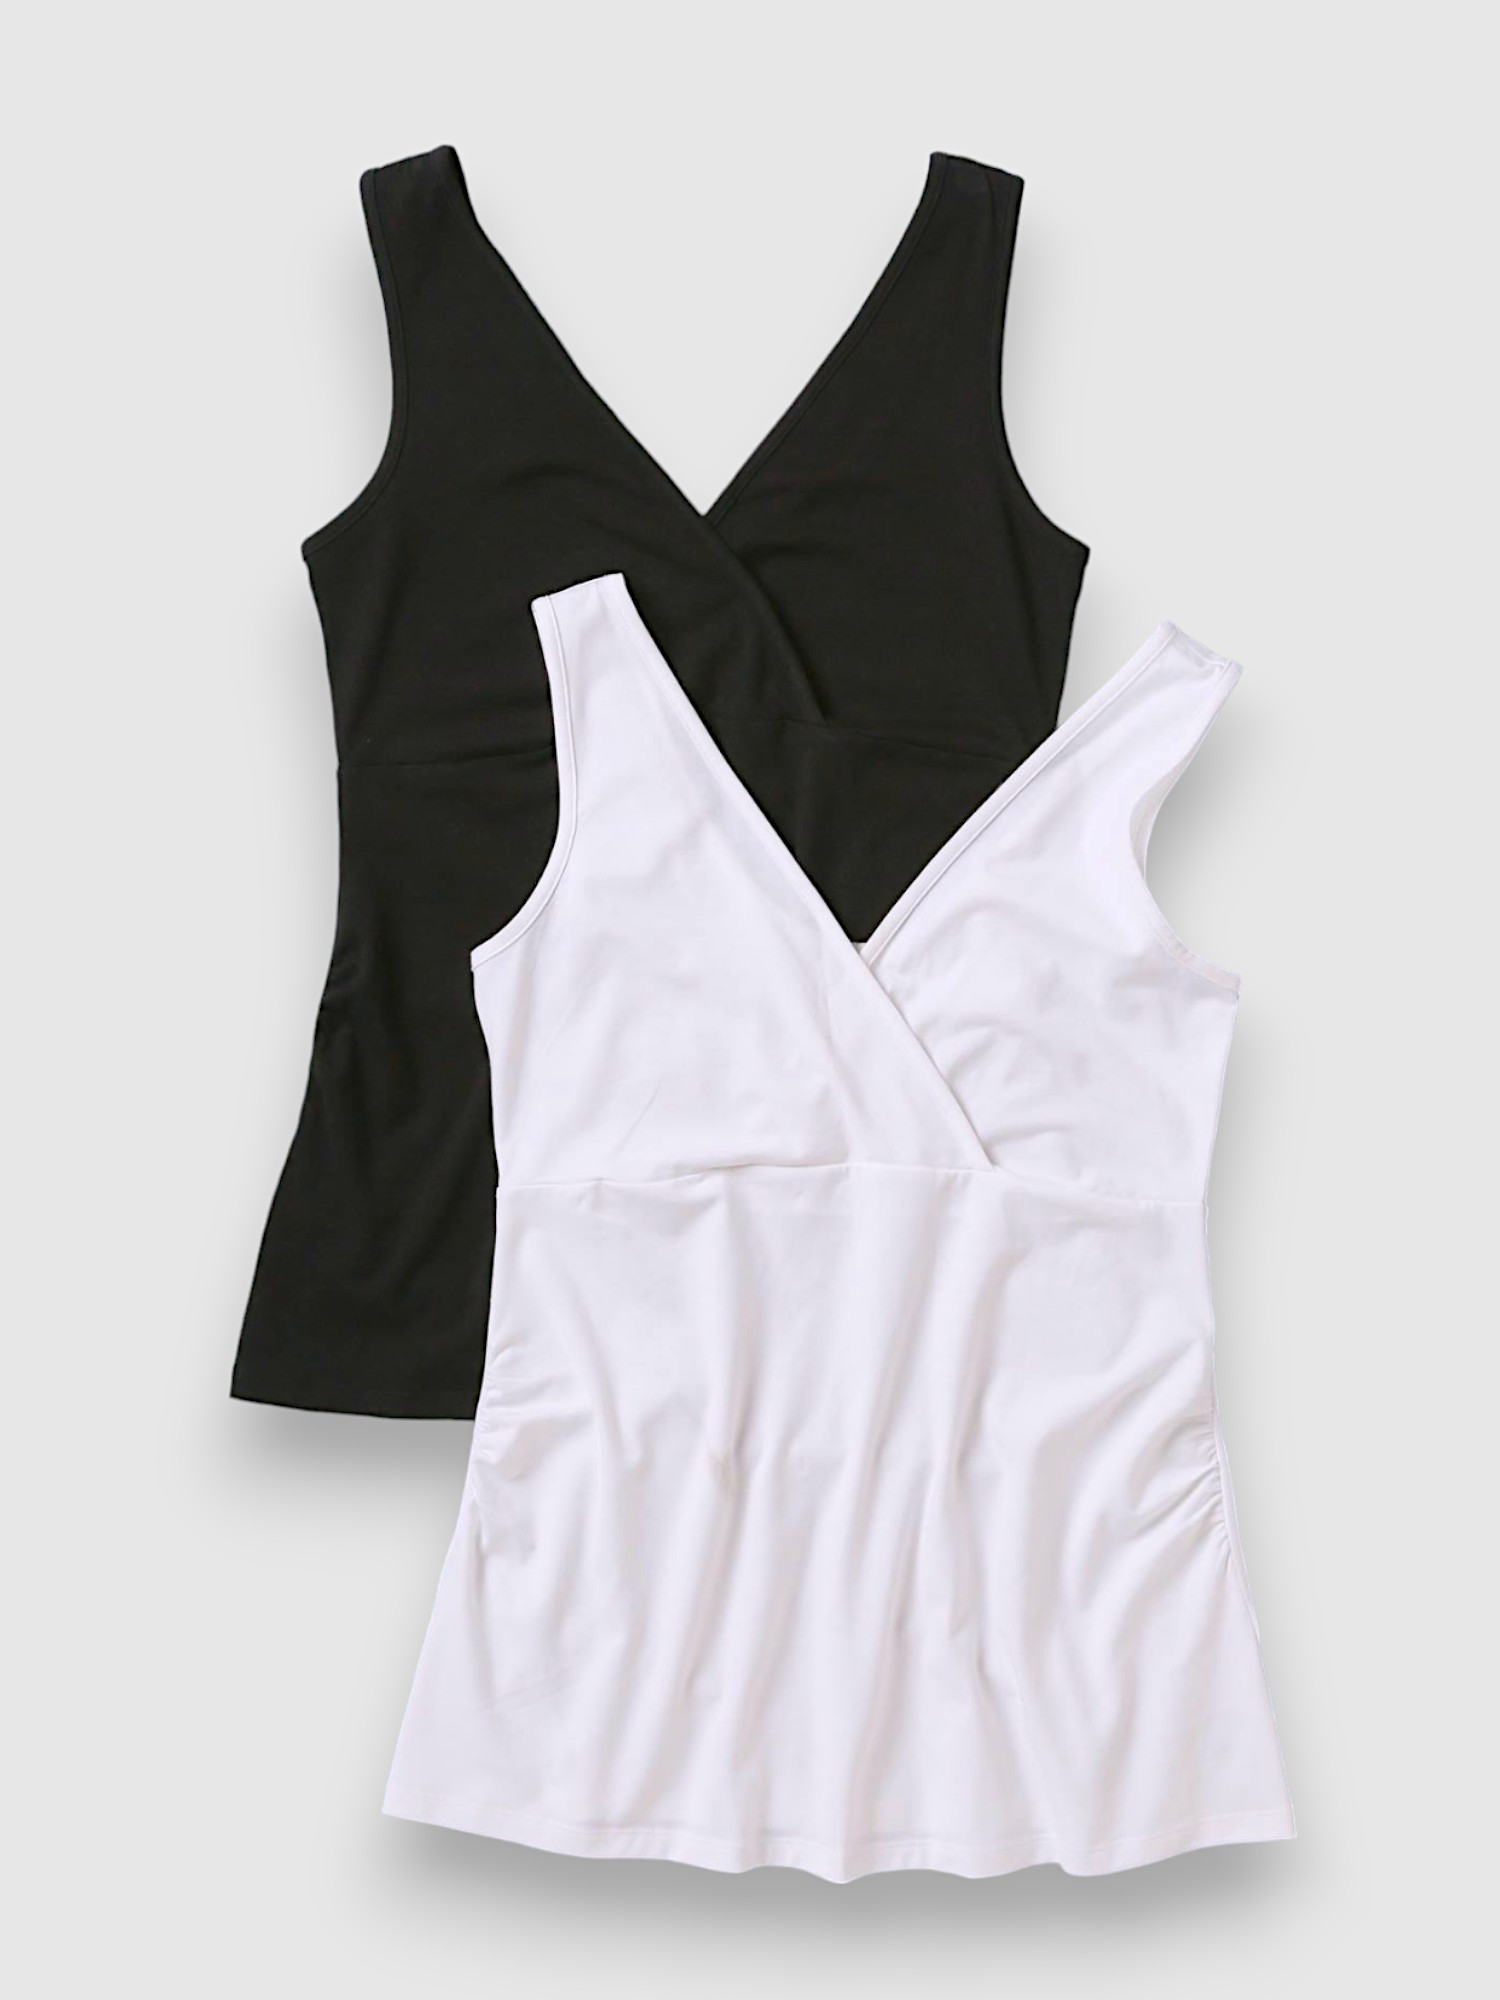 Maternity tank top, black and white